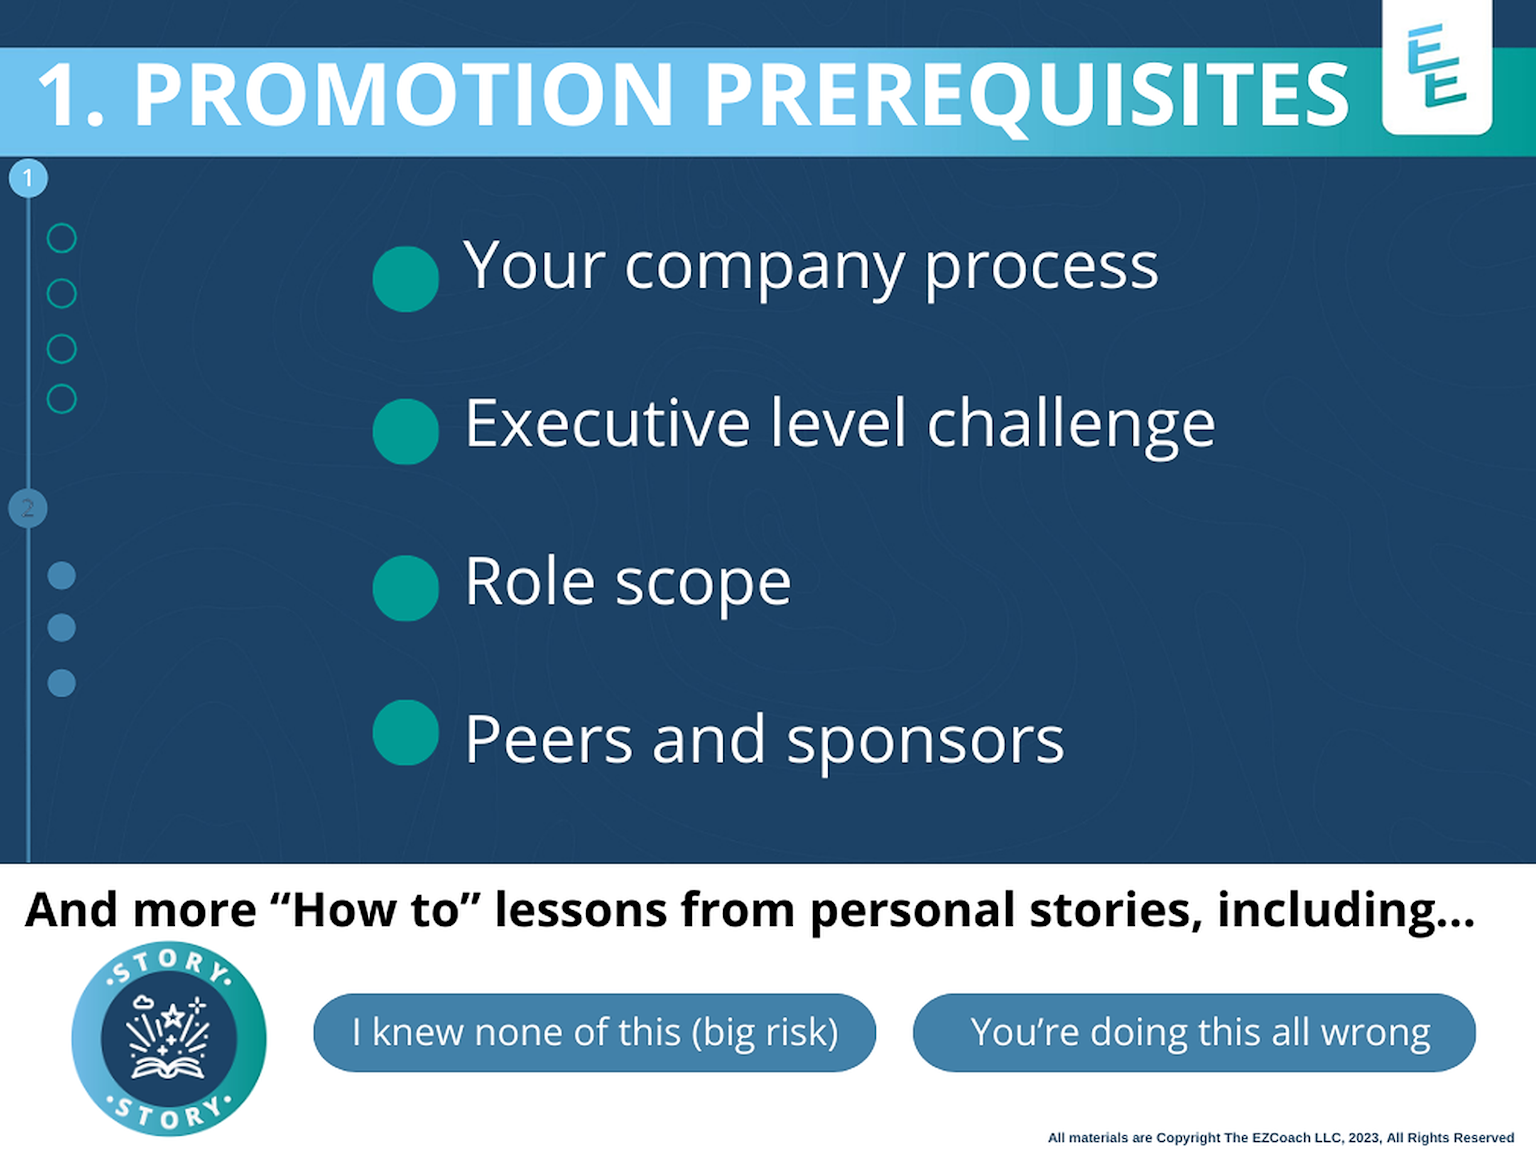 We will DIVE DEEP on each step you need to set your promotion up to win